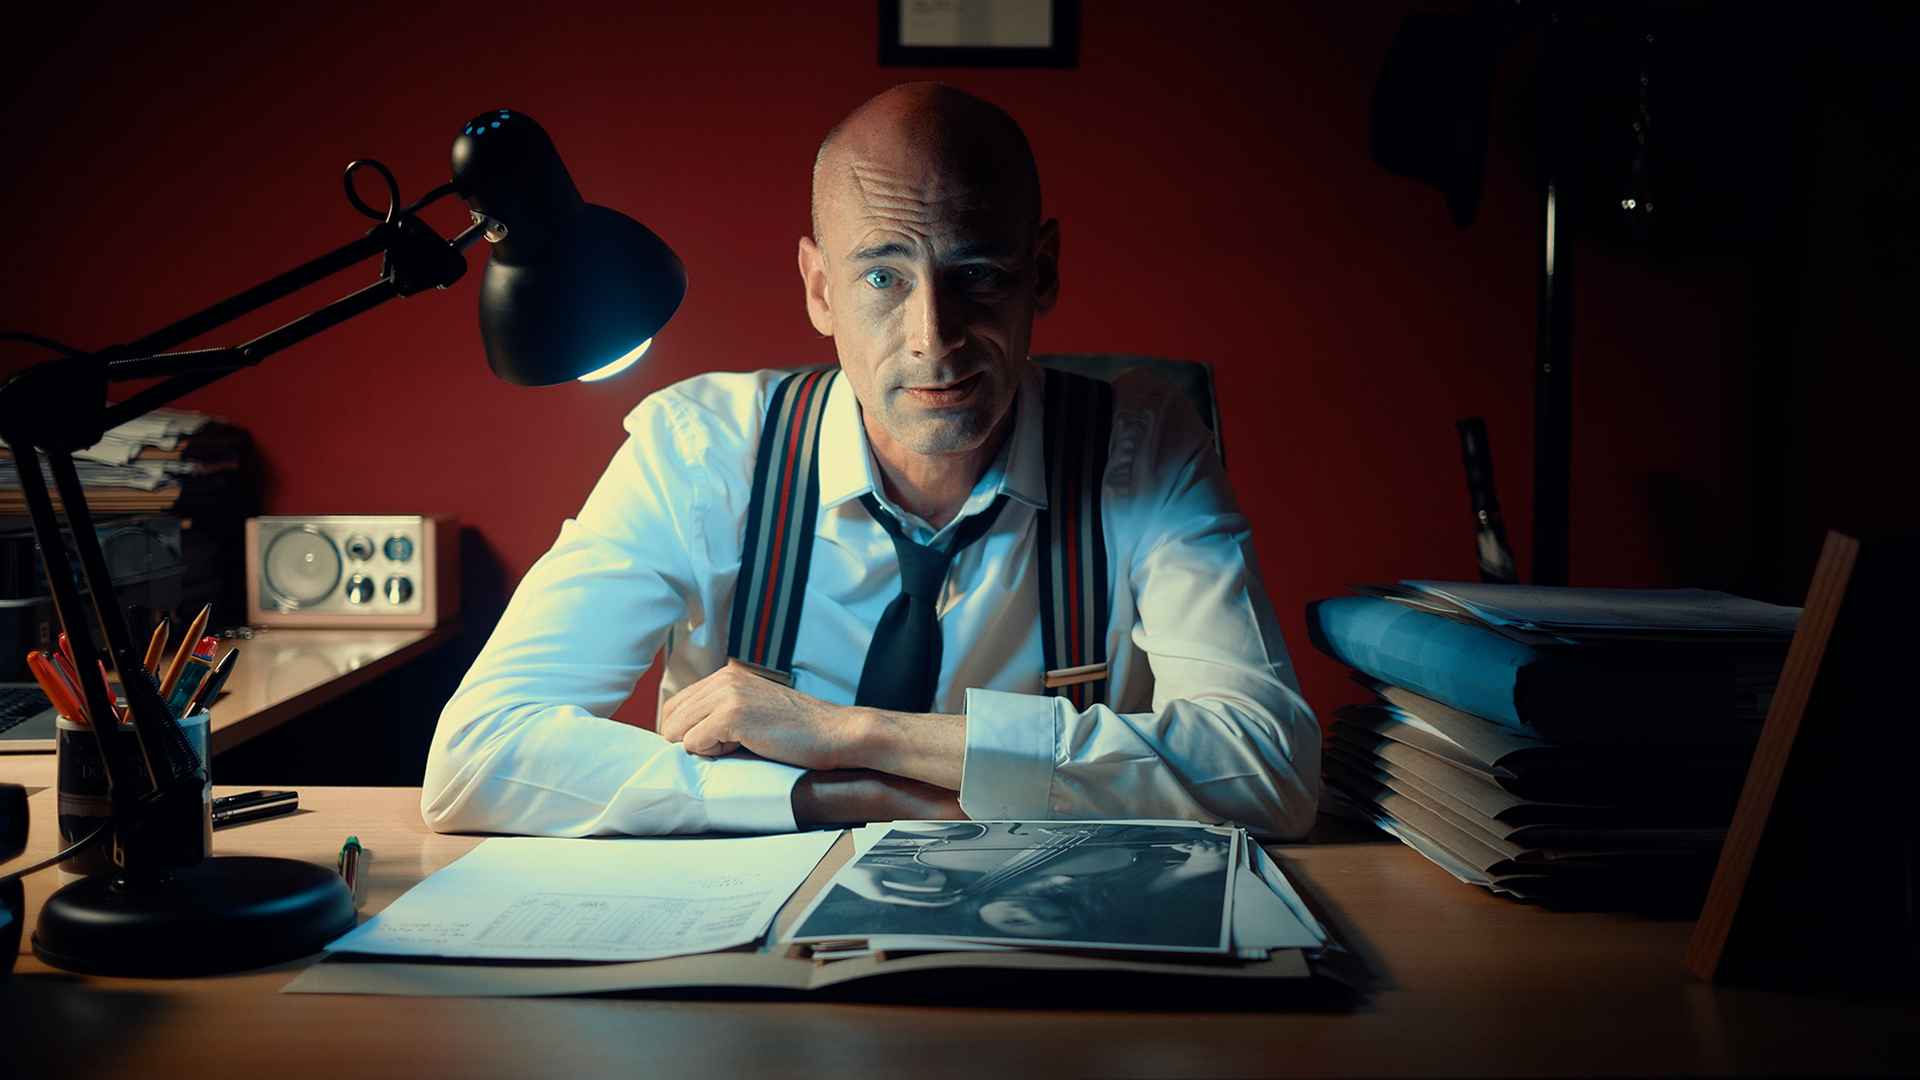 The ShapeShifting Detective Is a New FMV Game Coming To PS4 And Xbox